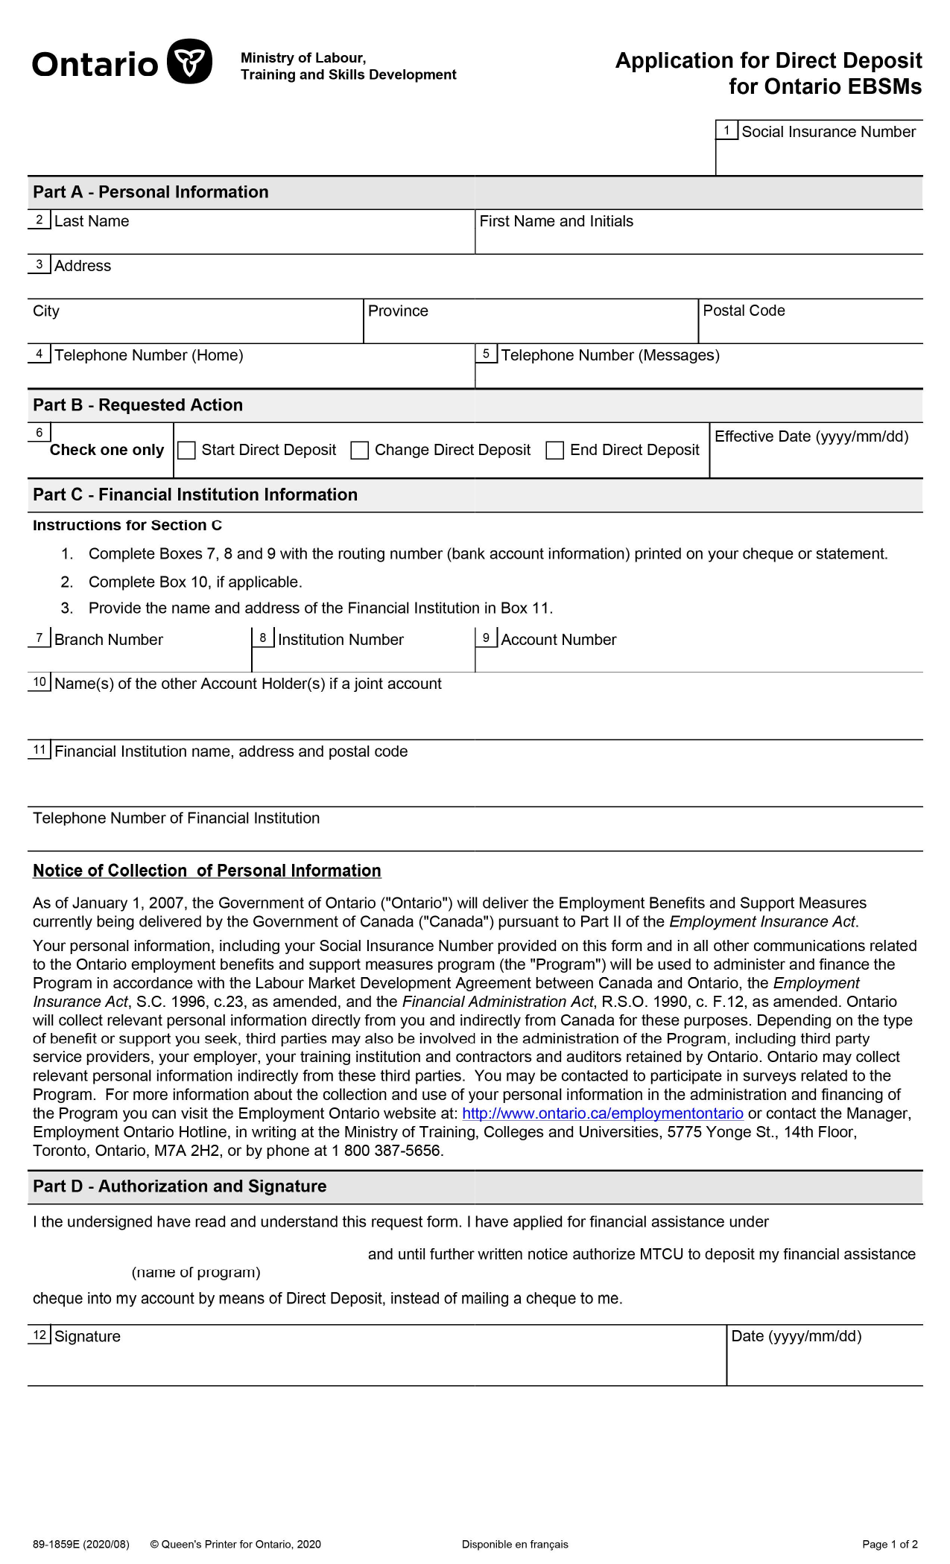 Form 89-1859E Application for Direct Deposit for Ontario Ebsms - Ontario, Canada, Page 1